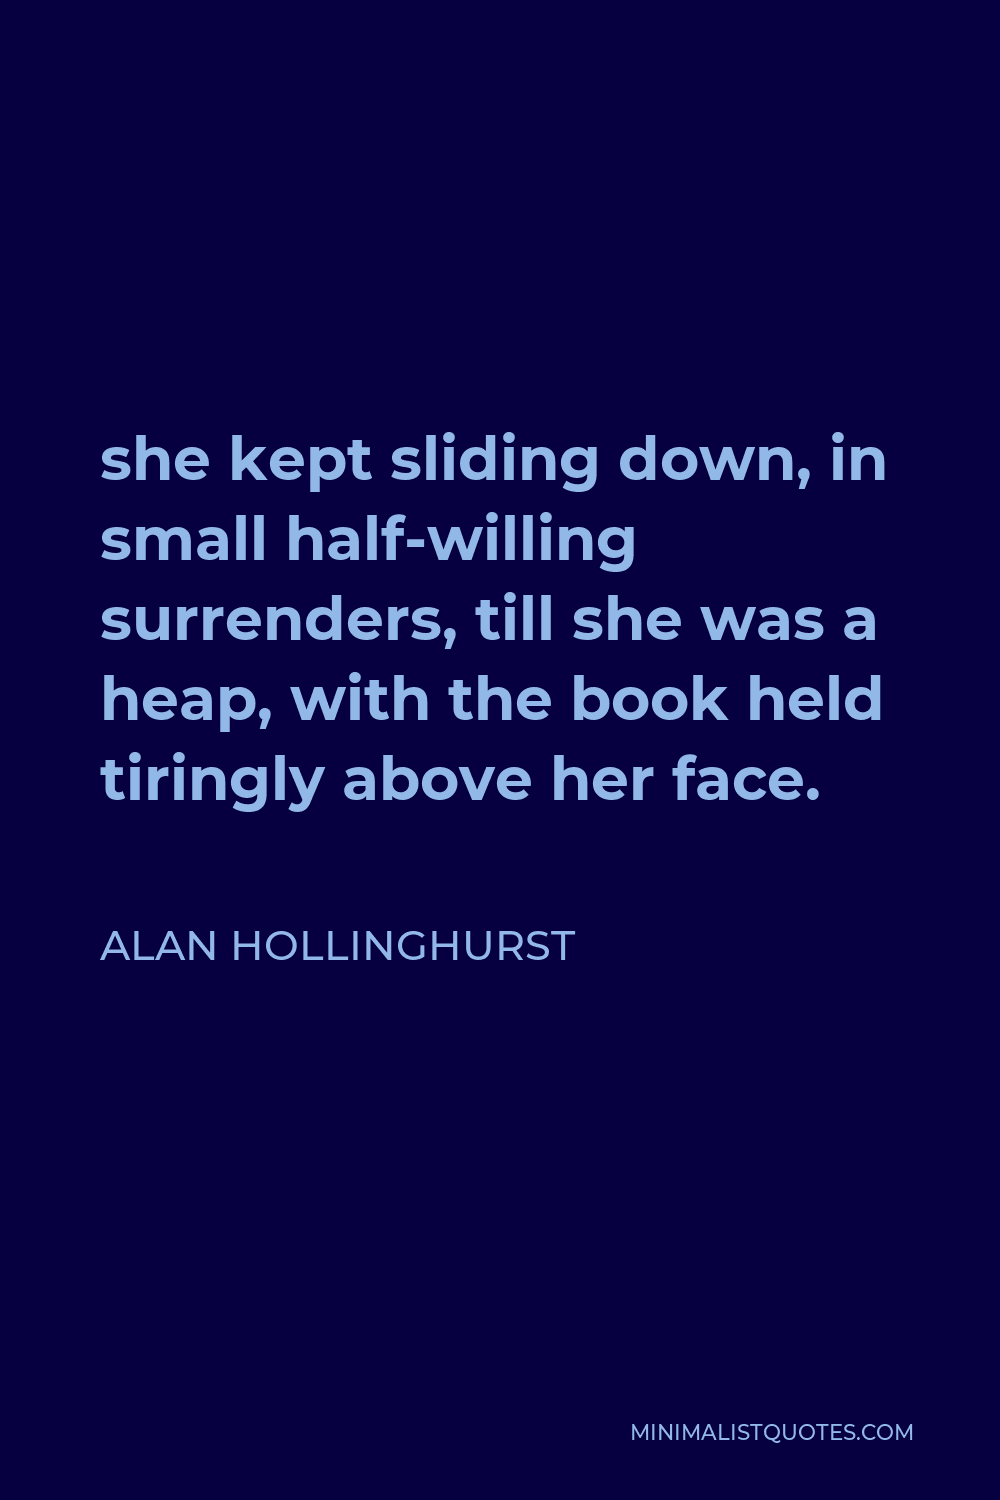 Alan Hollinghurst Quote - she kept sliding down, in small half-willing surrenders, till she was a heap, with the book held tiringly above her face.